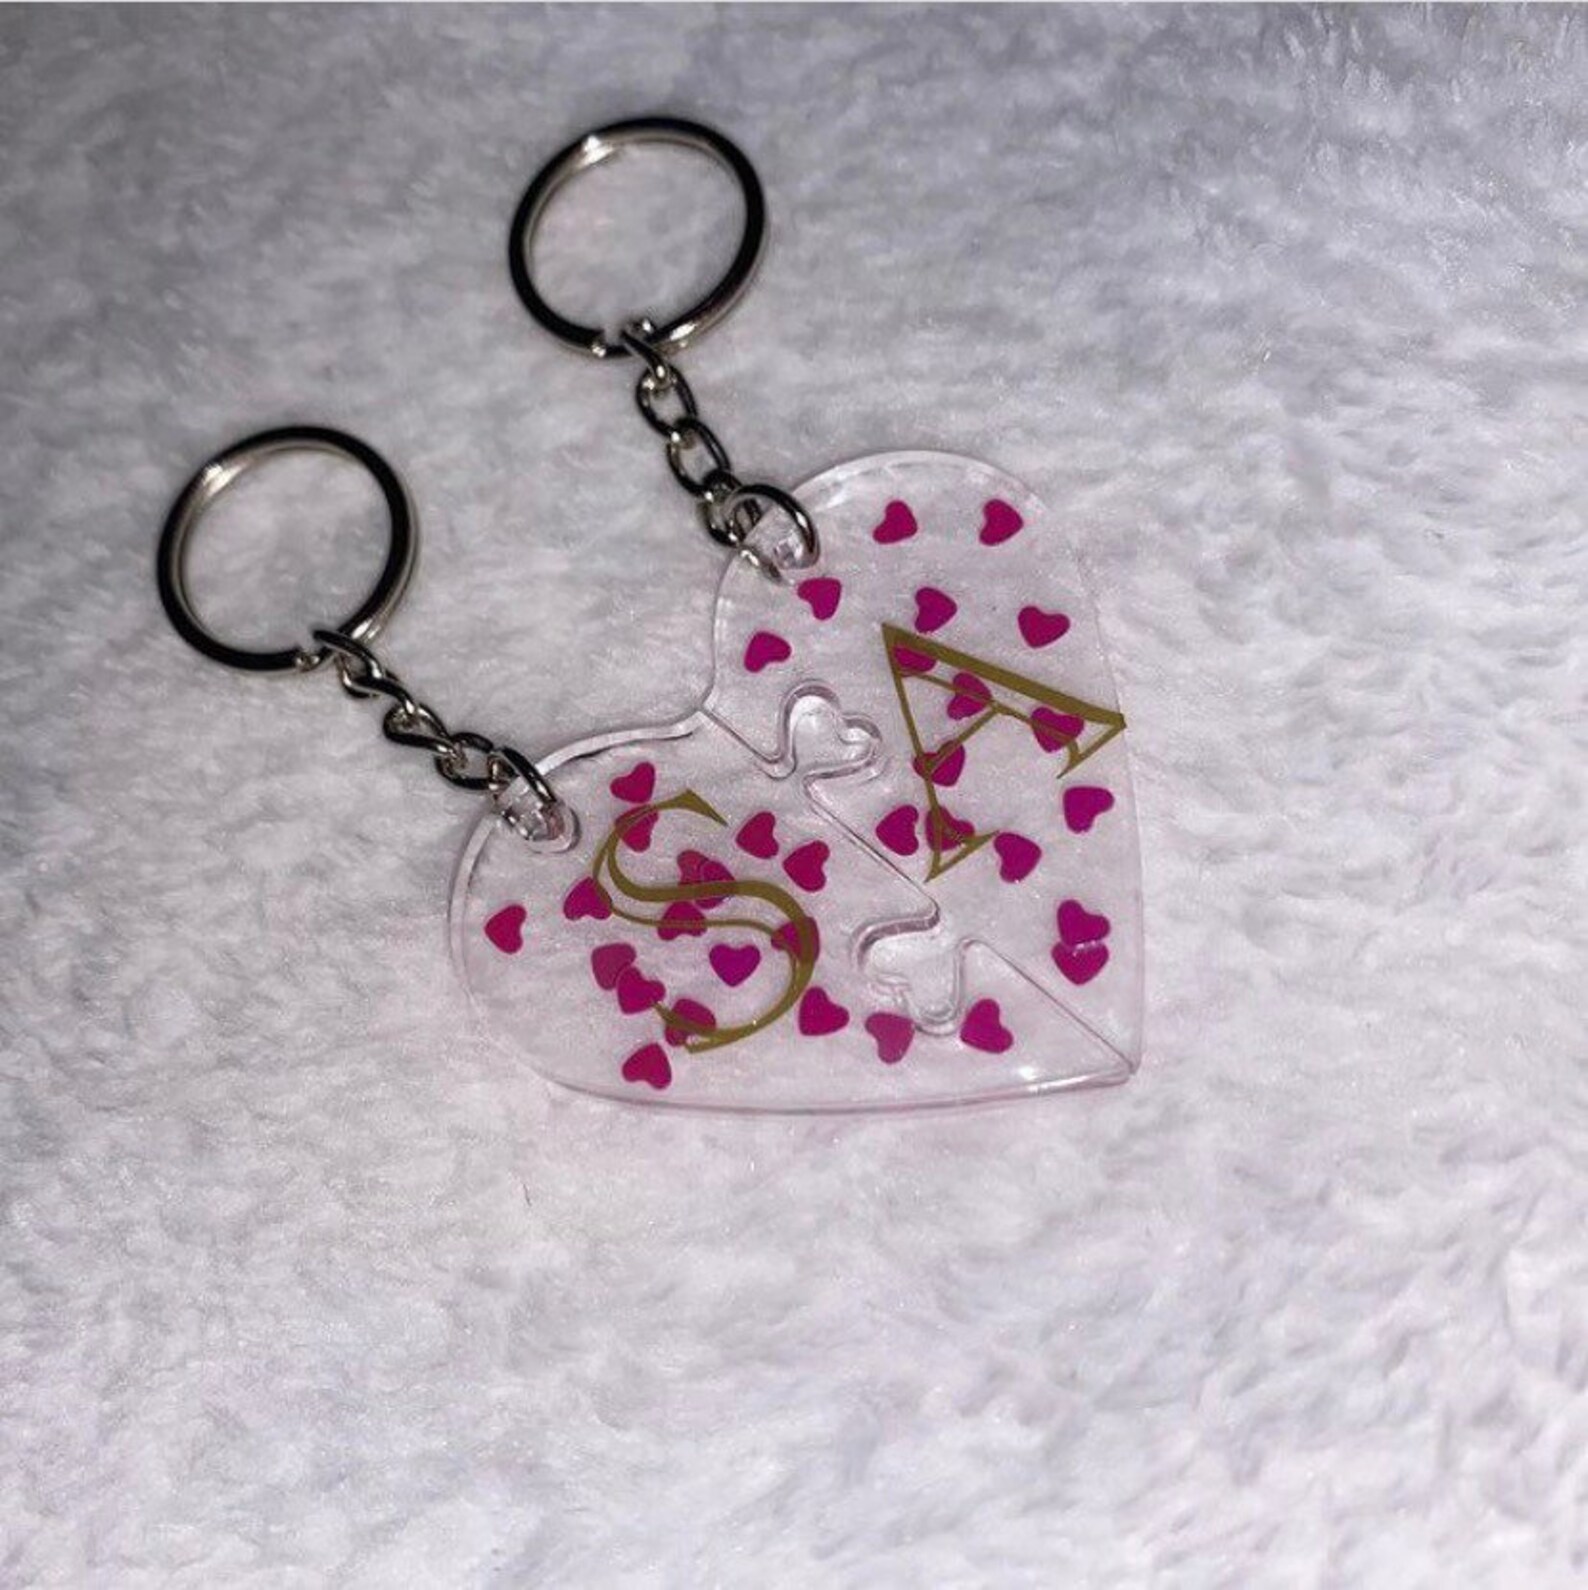 2 Connecting Half Heart Resin Keychains w/ Gold Flakes Rose | Etsy